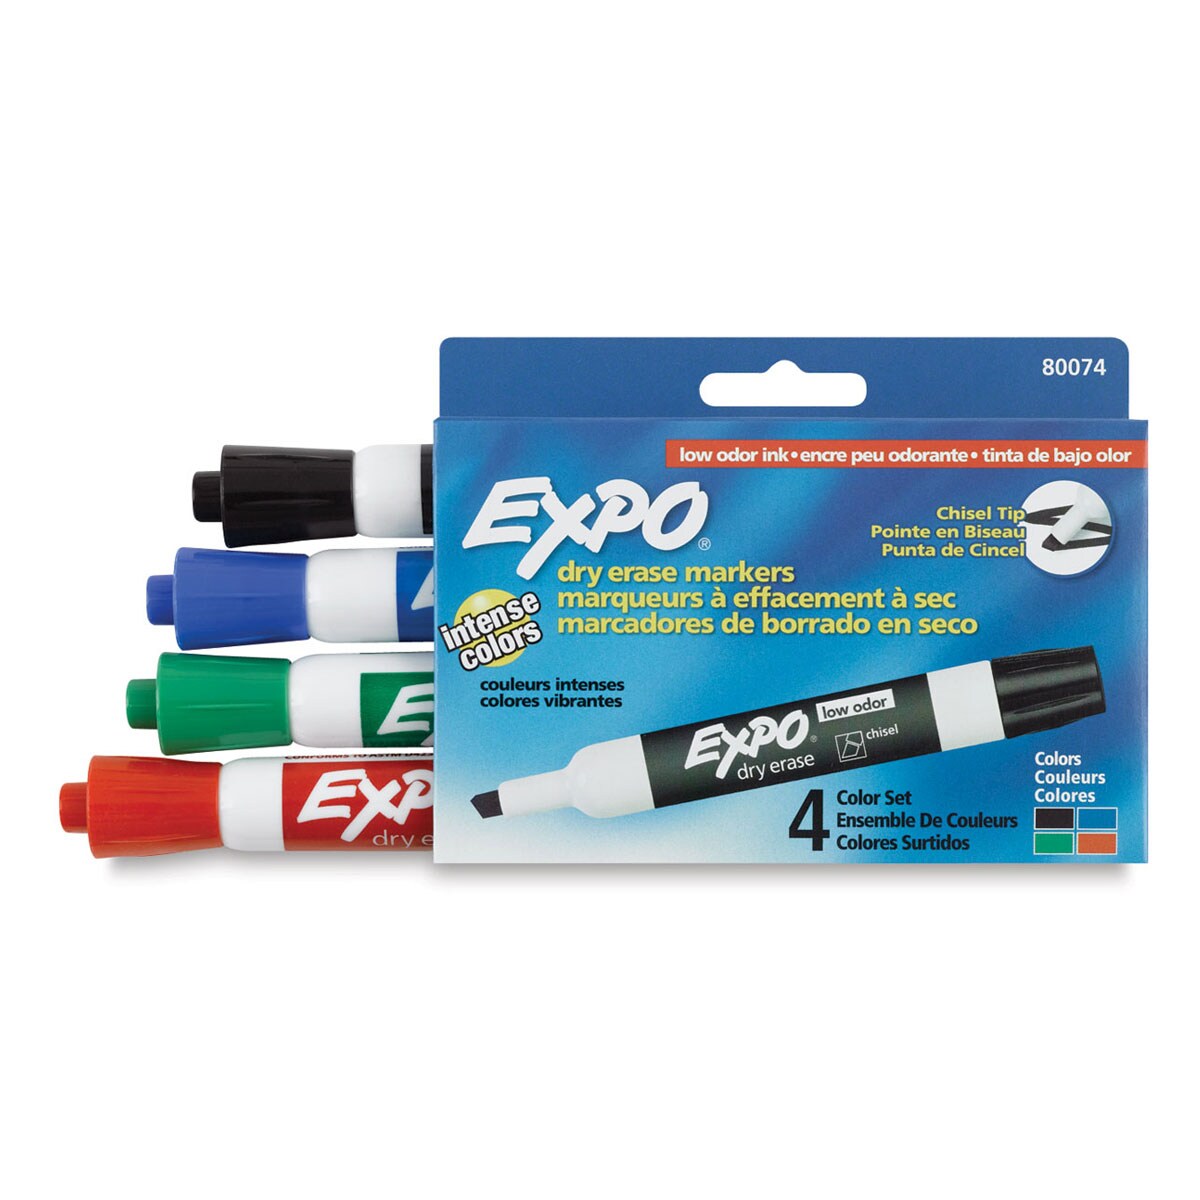 EXPO Dry Erase Markers Low Odor Ink Chisel Tip Assorted Colors - 4